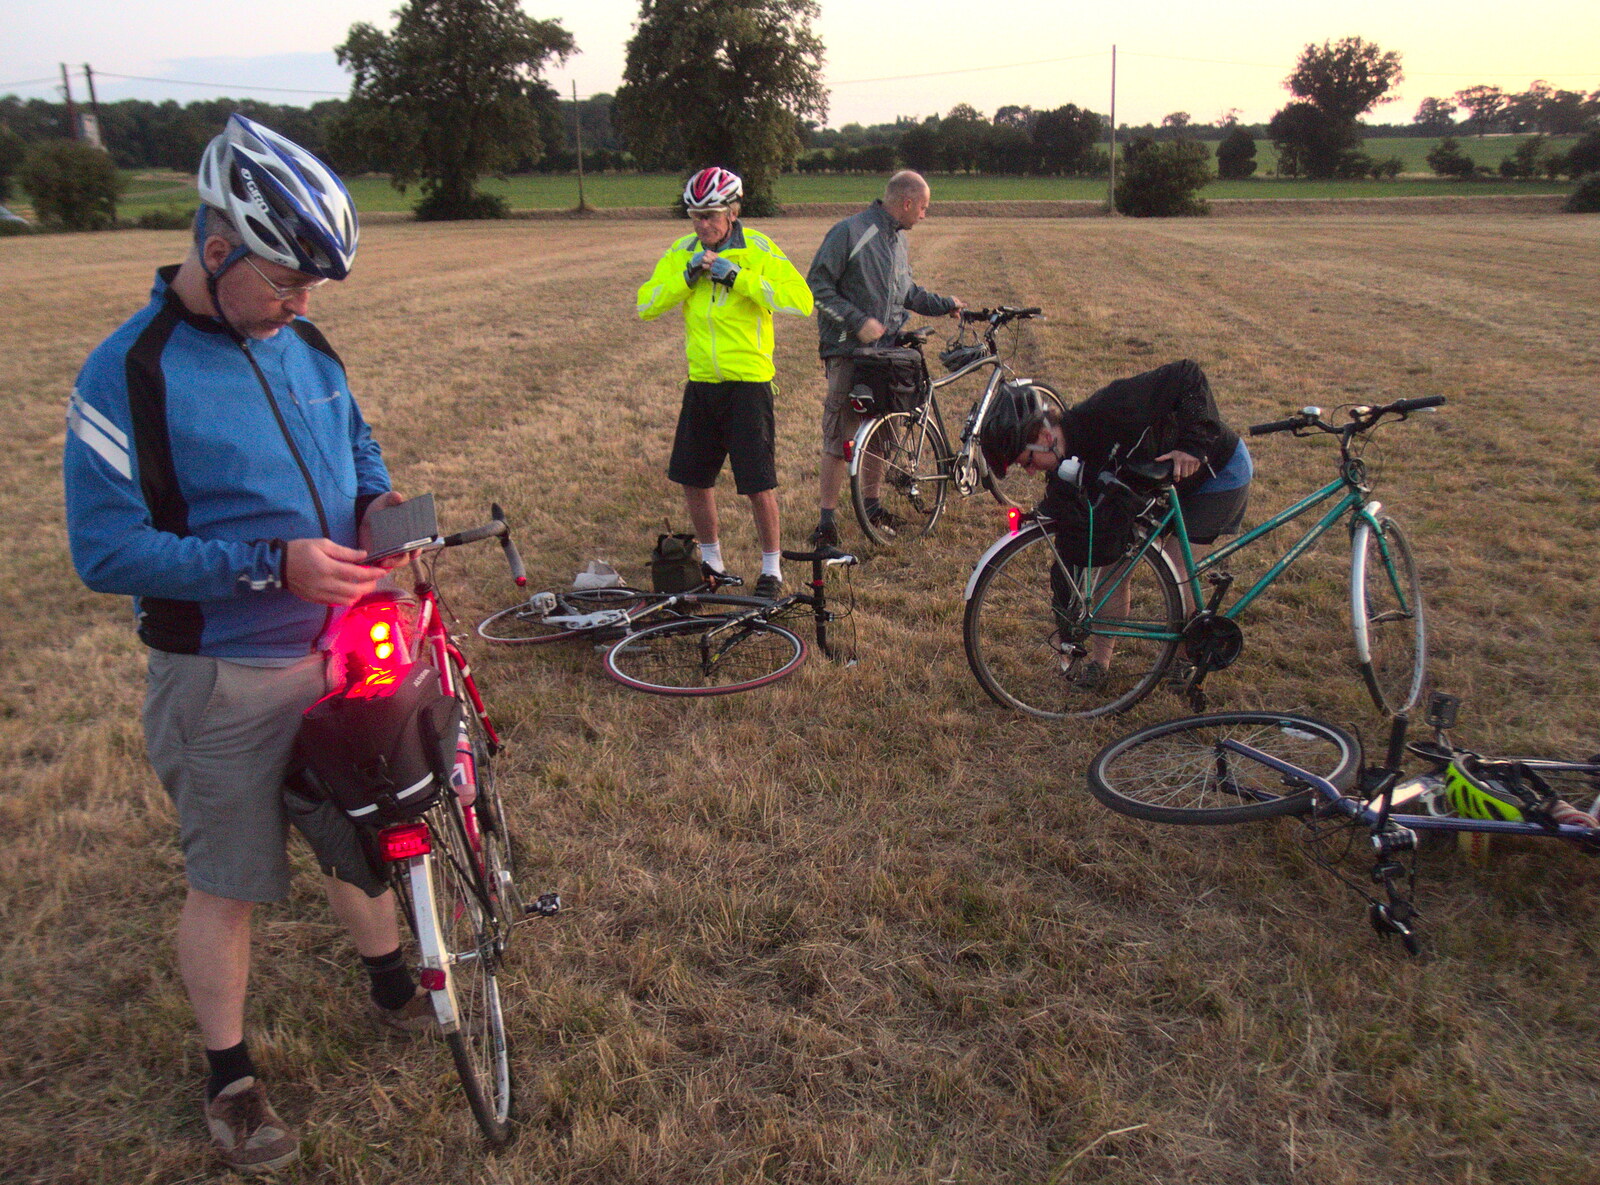 We head off in the gathering dusk from The BSCC Rides to Star Wing Beer Festival, Redgrave, Suffolk - 12th July 2018